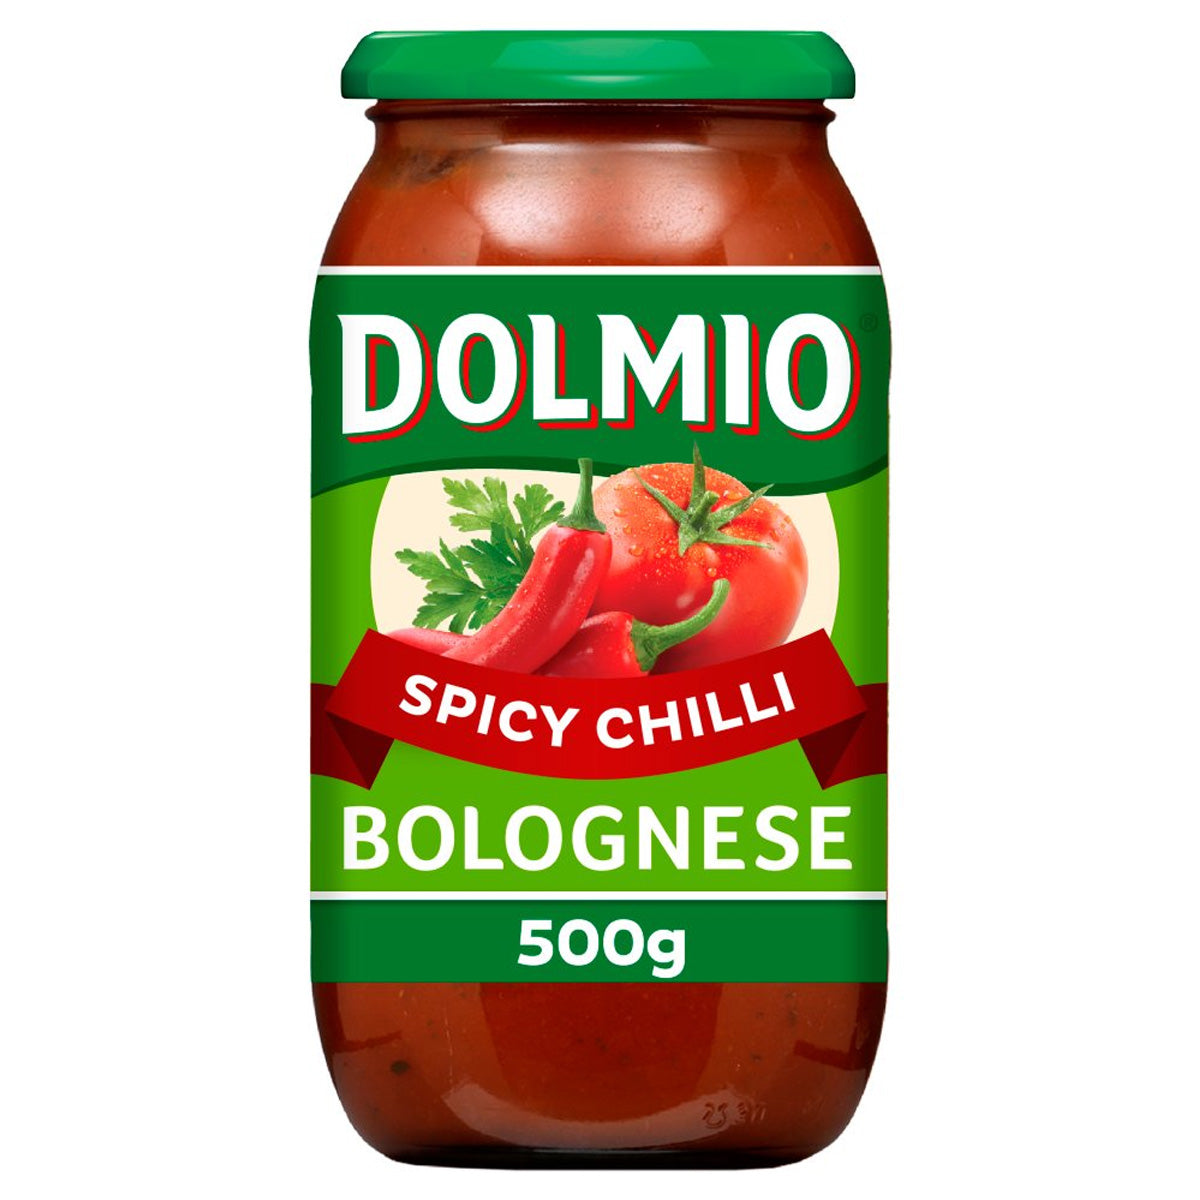 Dolmio - Bolognese Spicy Chilli Pasta Sauce - 500g - Continental Food Store